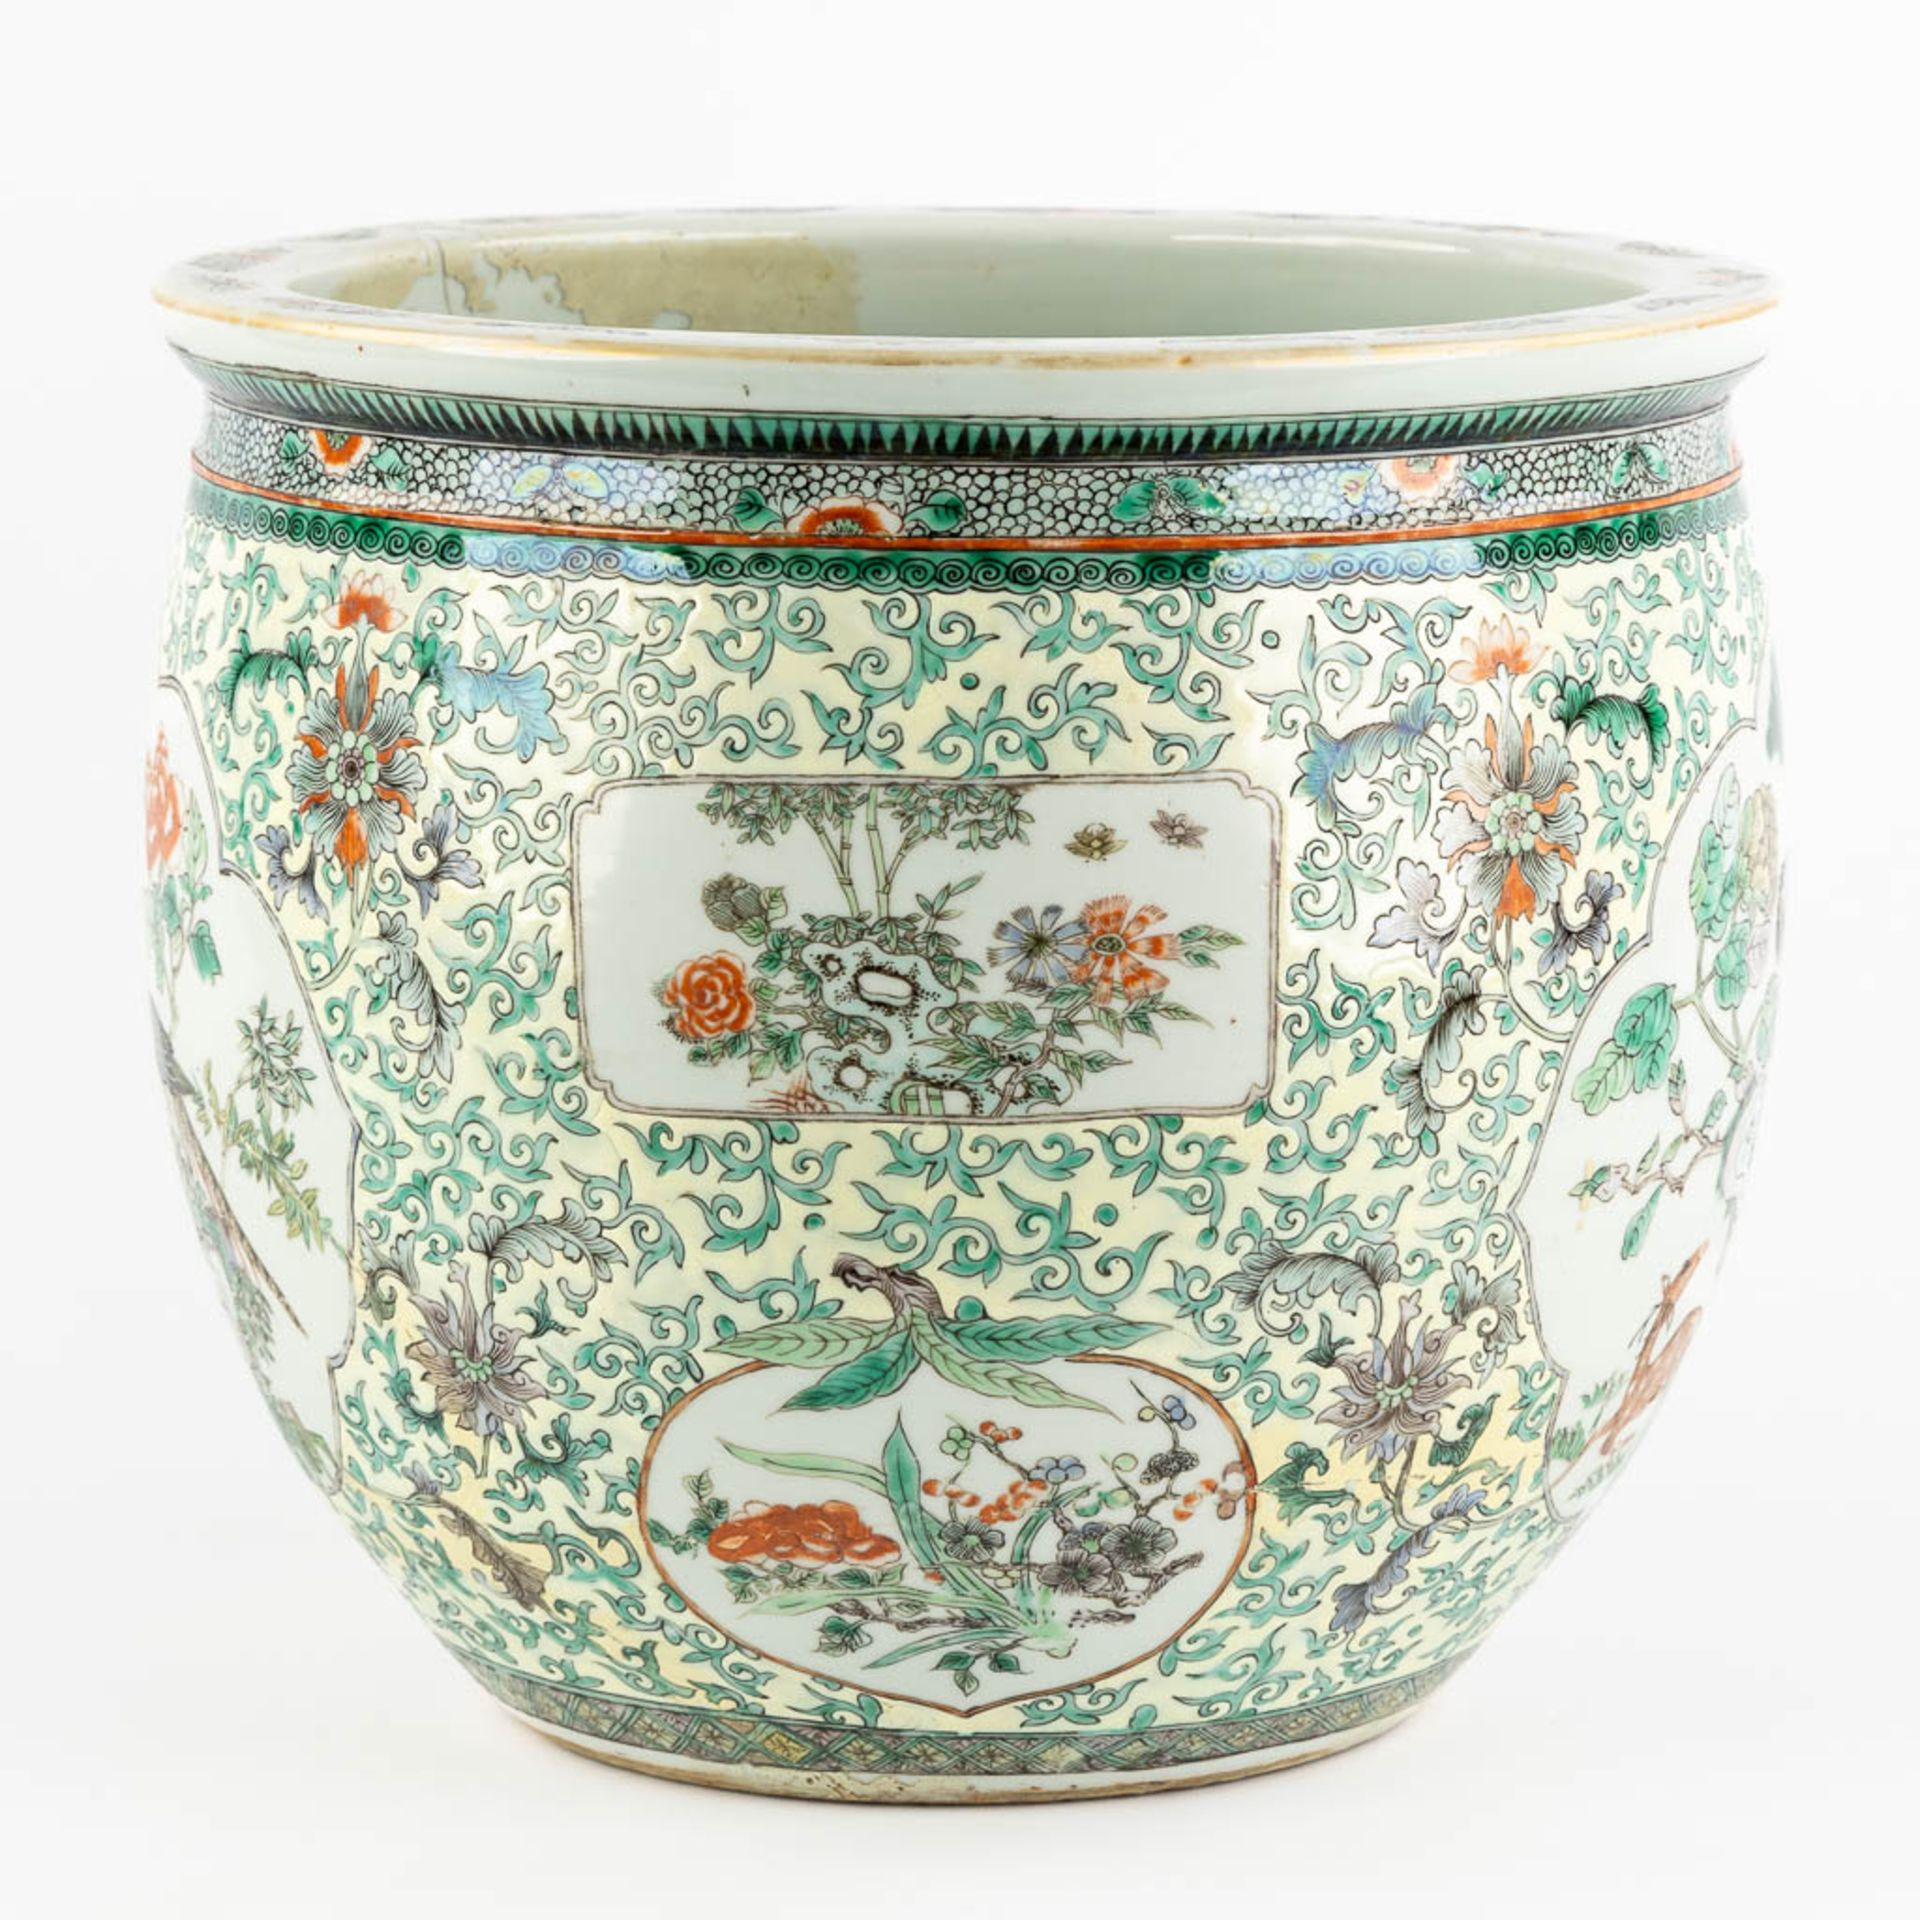 A Large Chinese Cache-Pot, Famille Verte decorated with fauna and flora. 19th C. (H:35 x D:40 cm) - Bild 4 aus 14